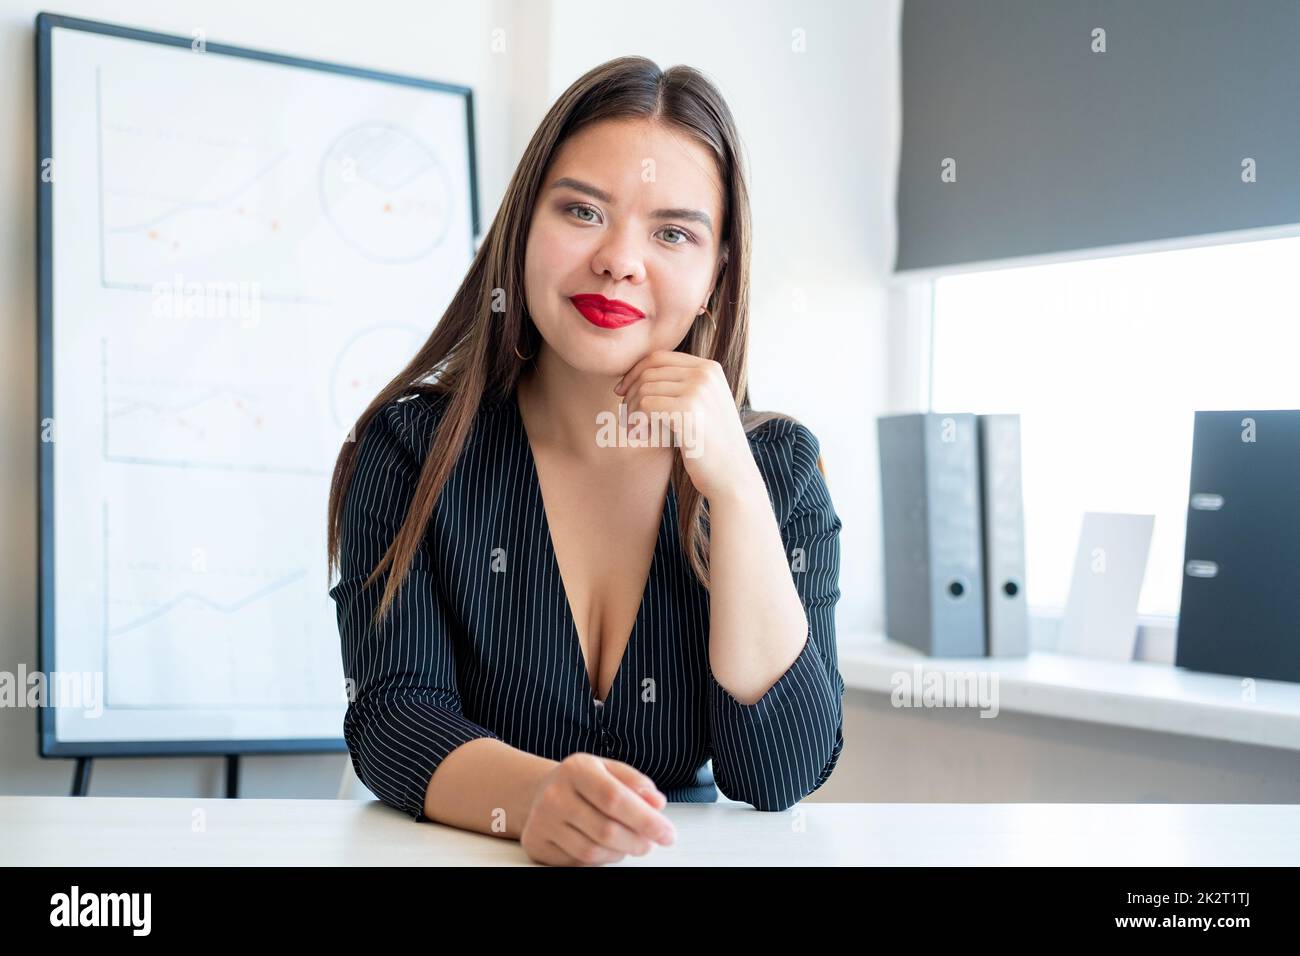 Female leadership. Project management. Strategy planning. Professional career. Confident ambitious smart woman at light office with graphs charts on w Stock Photo